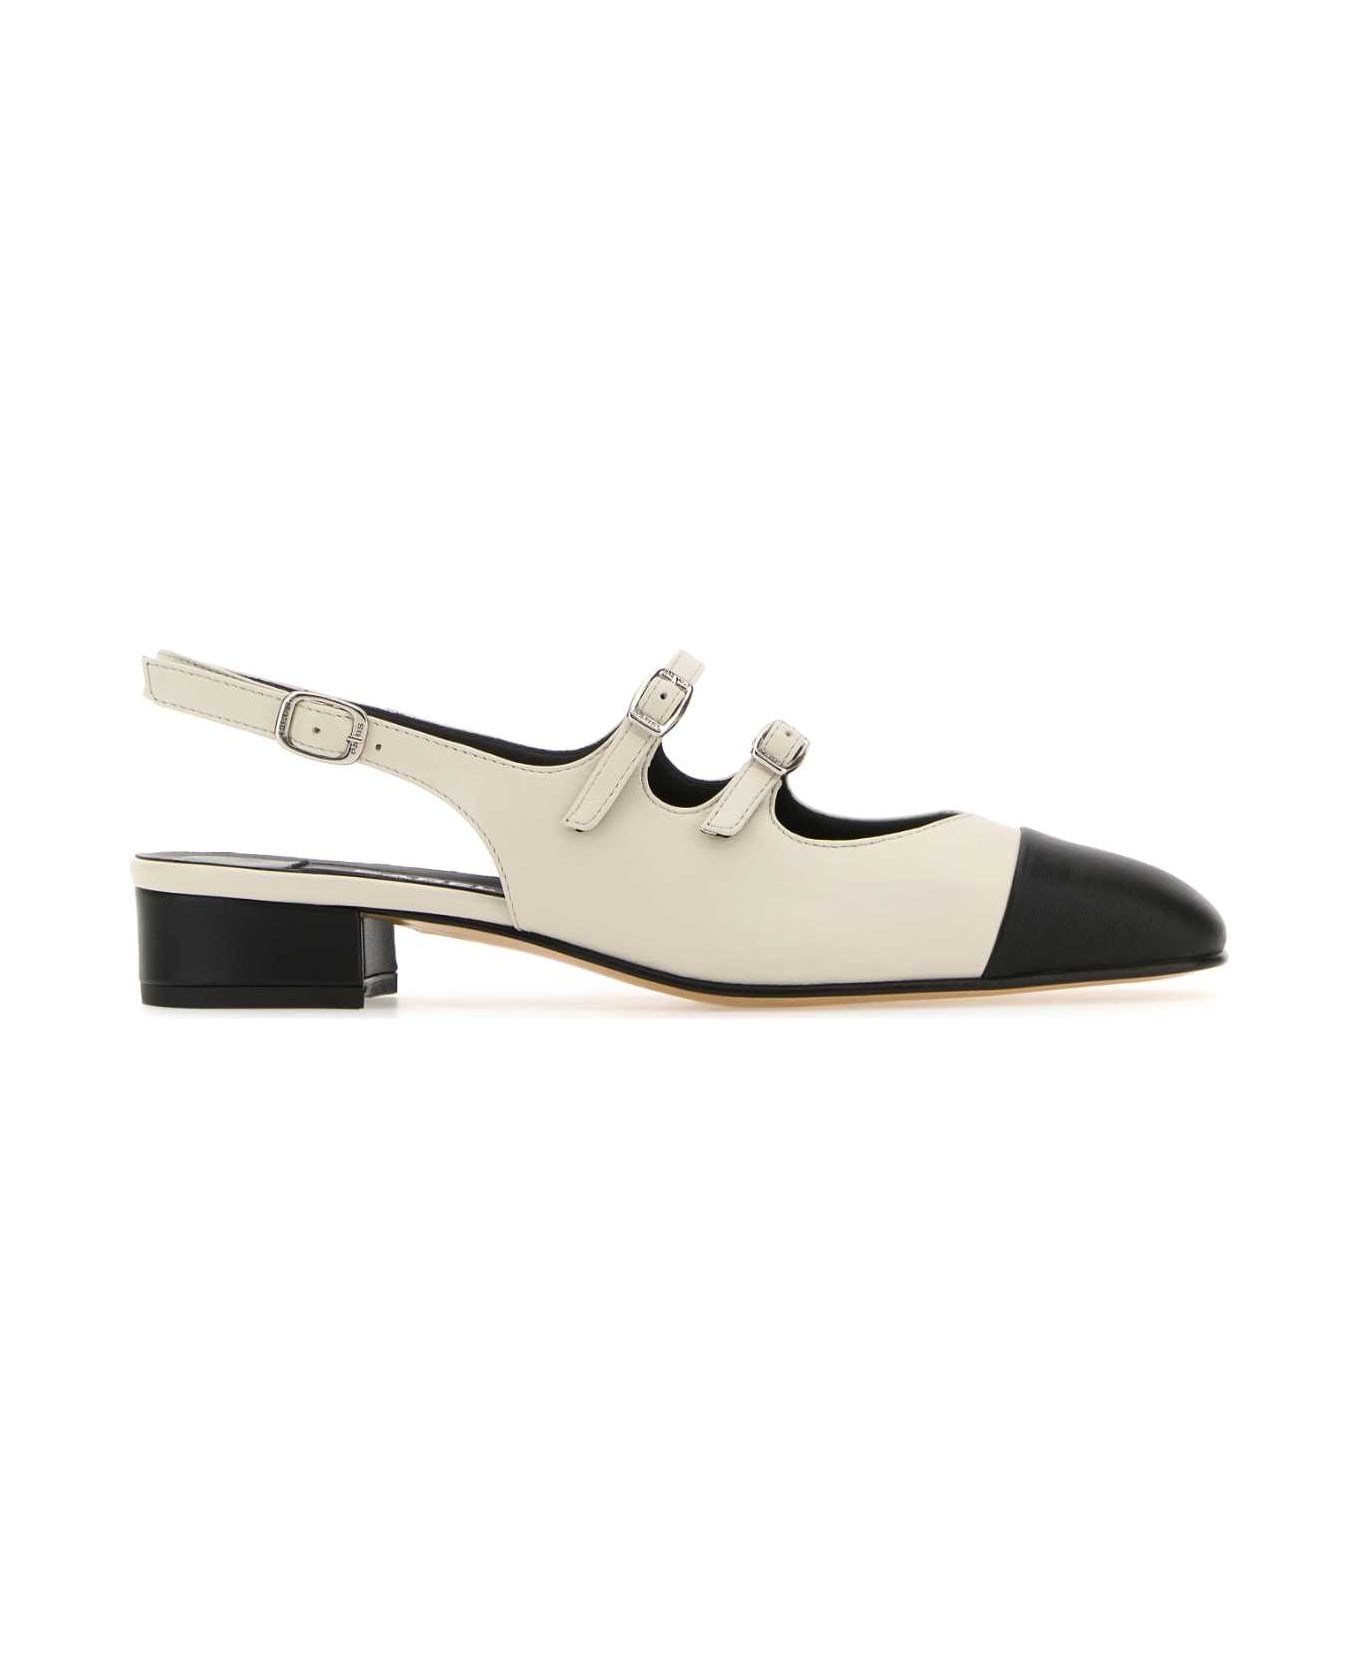 Carel Two-tone Leather Abricot Pumps - BEIGE